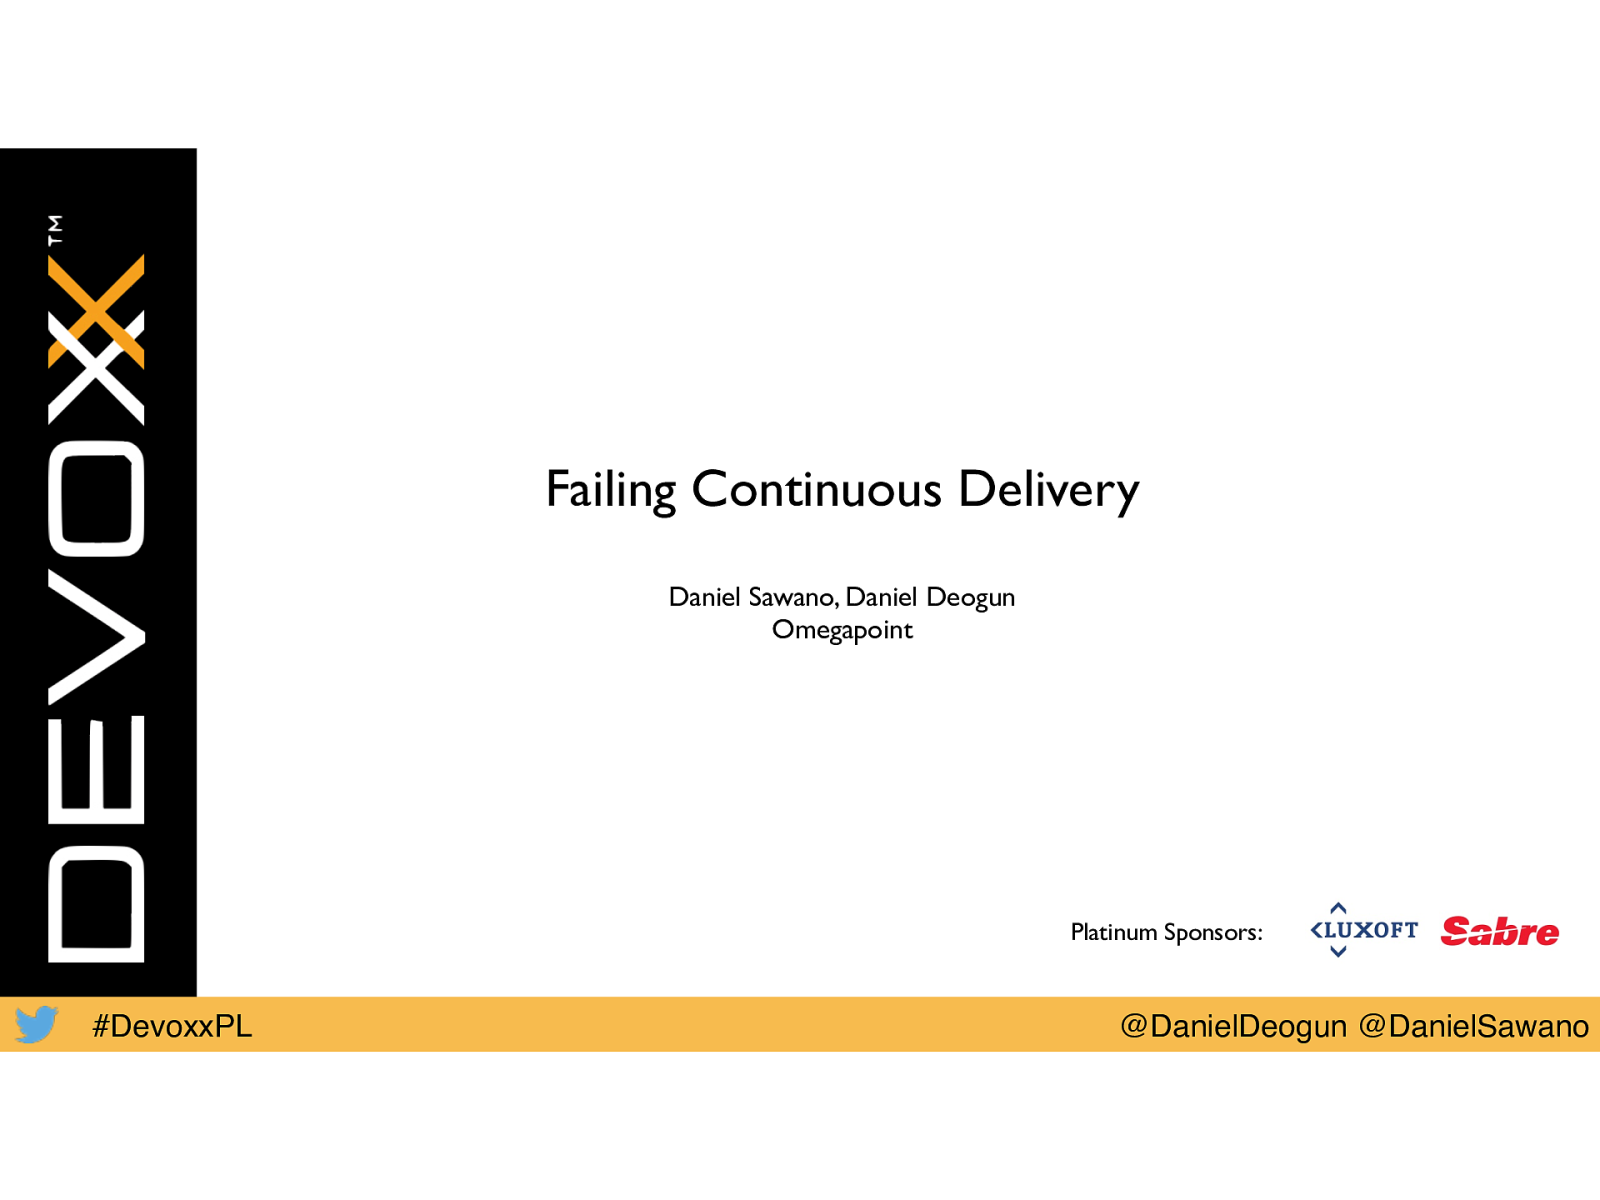 Failing Continuous Delivery